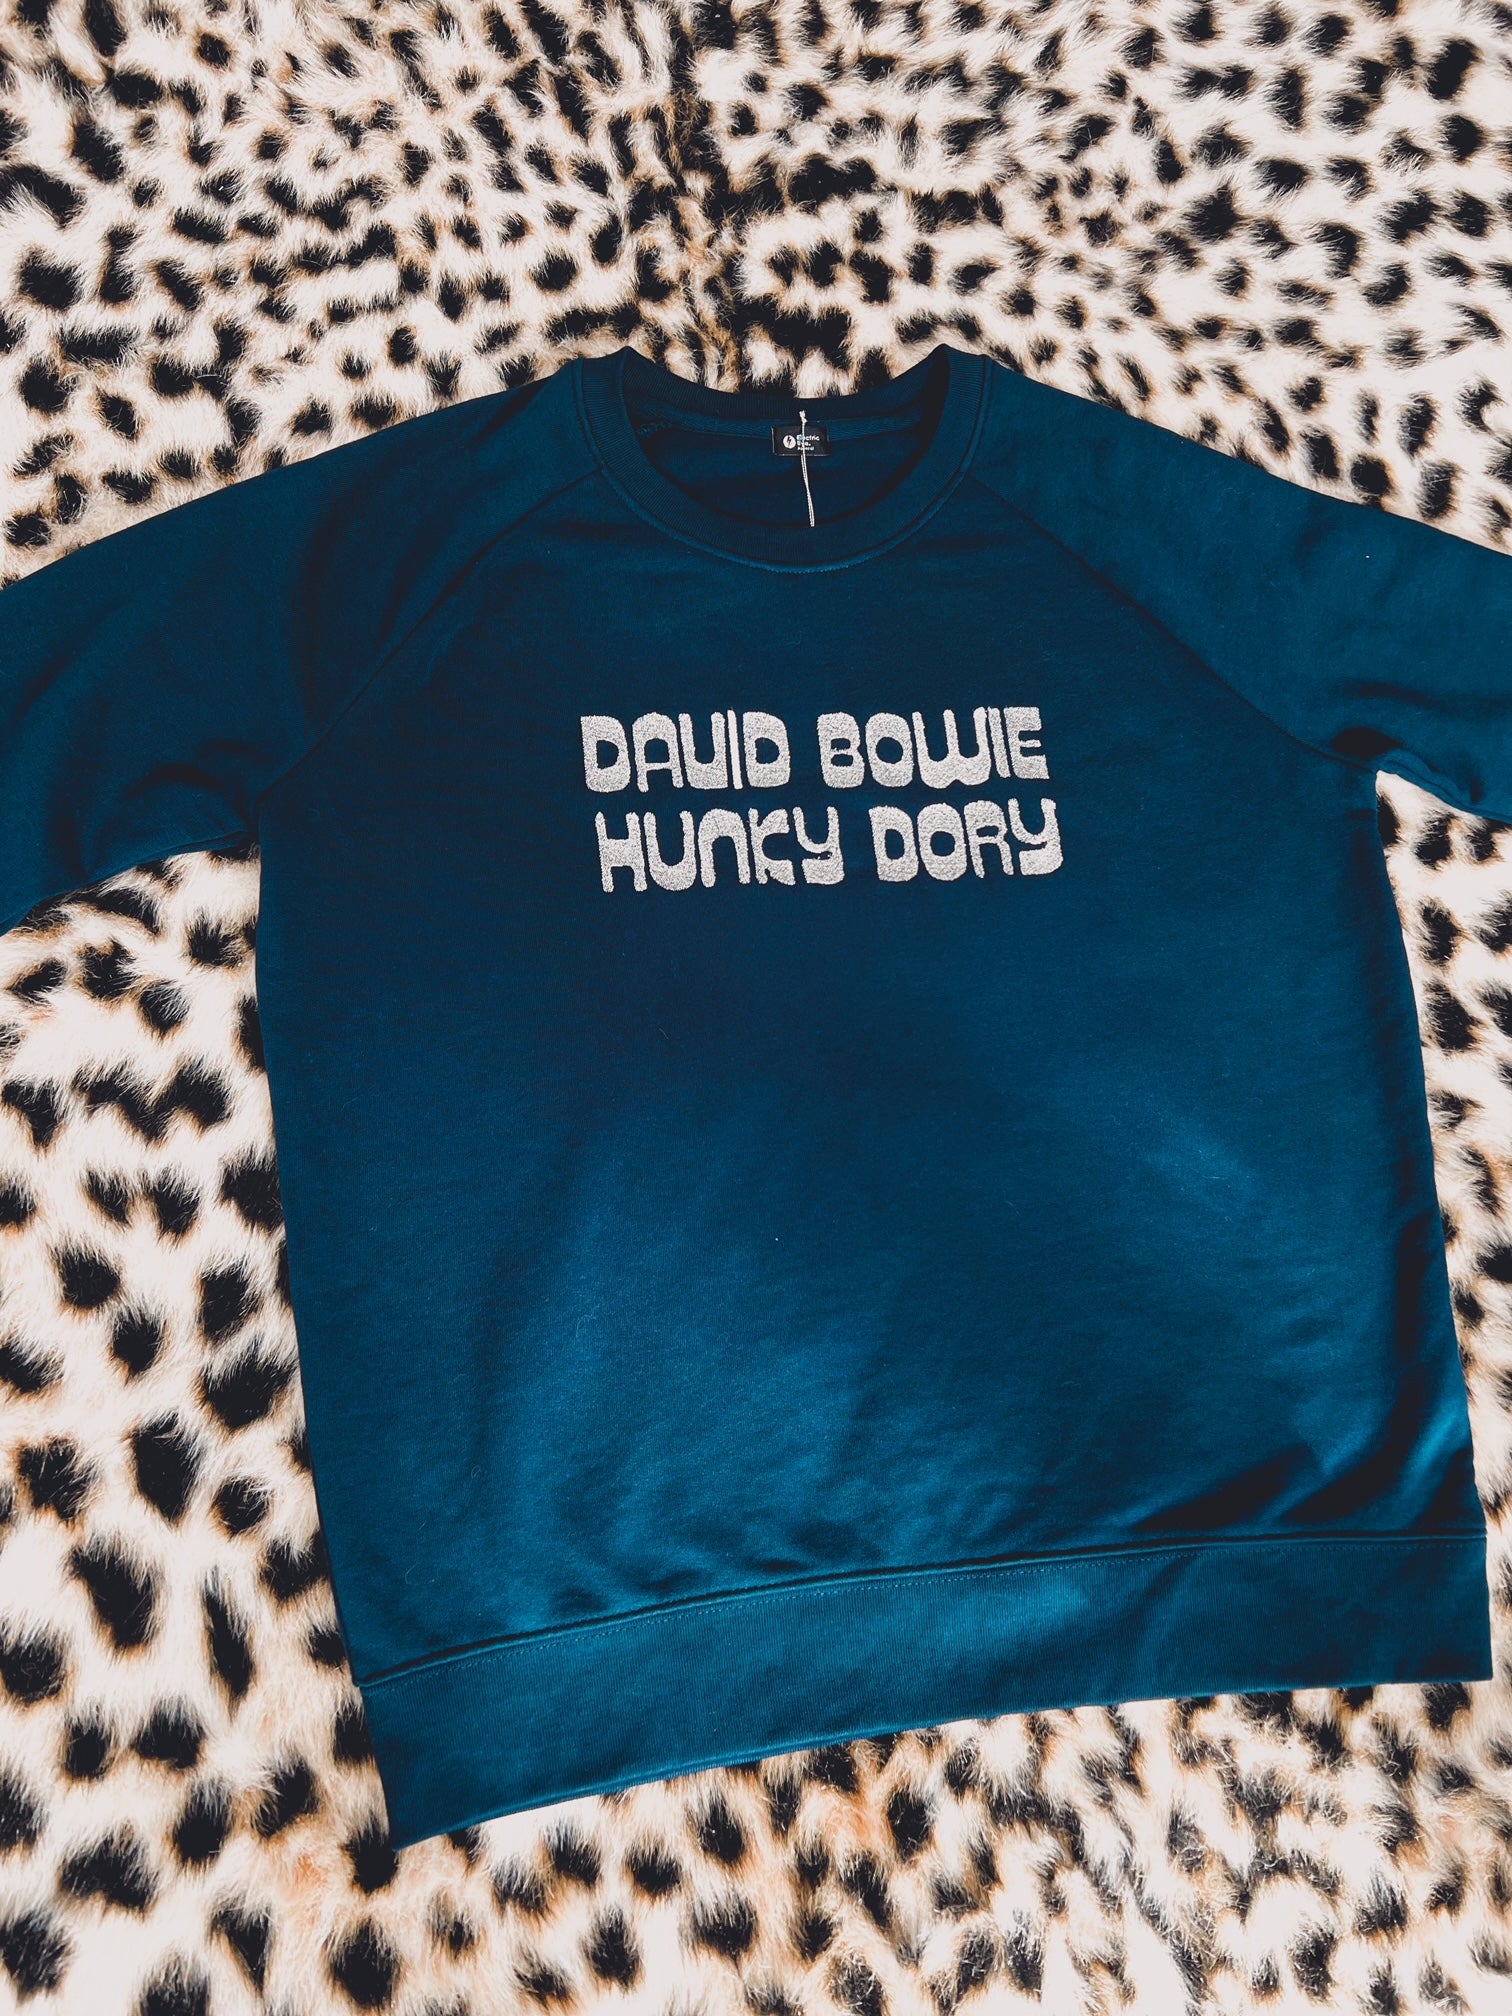 'DAVID BOWIE HUNKY DORY' EMBROIDERED UNISEX ORGANIC COTTON 'STROLLER' SWEATSHIRT - optional embroidery colour